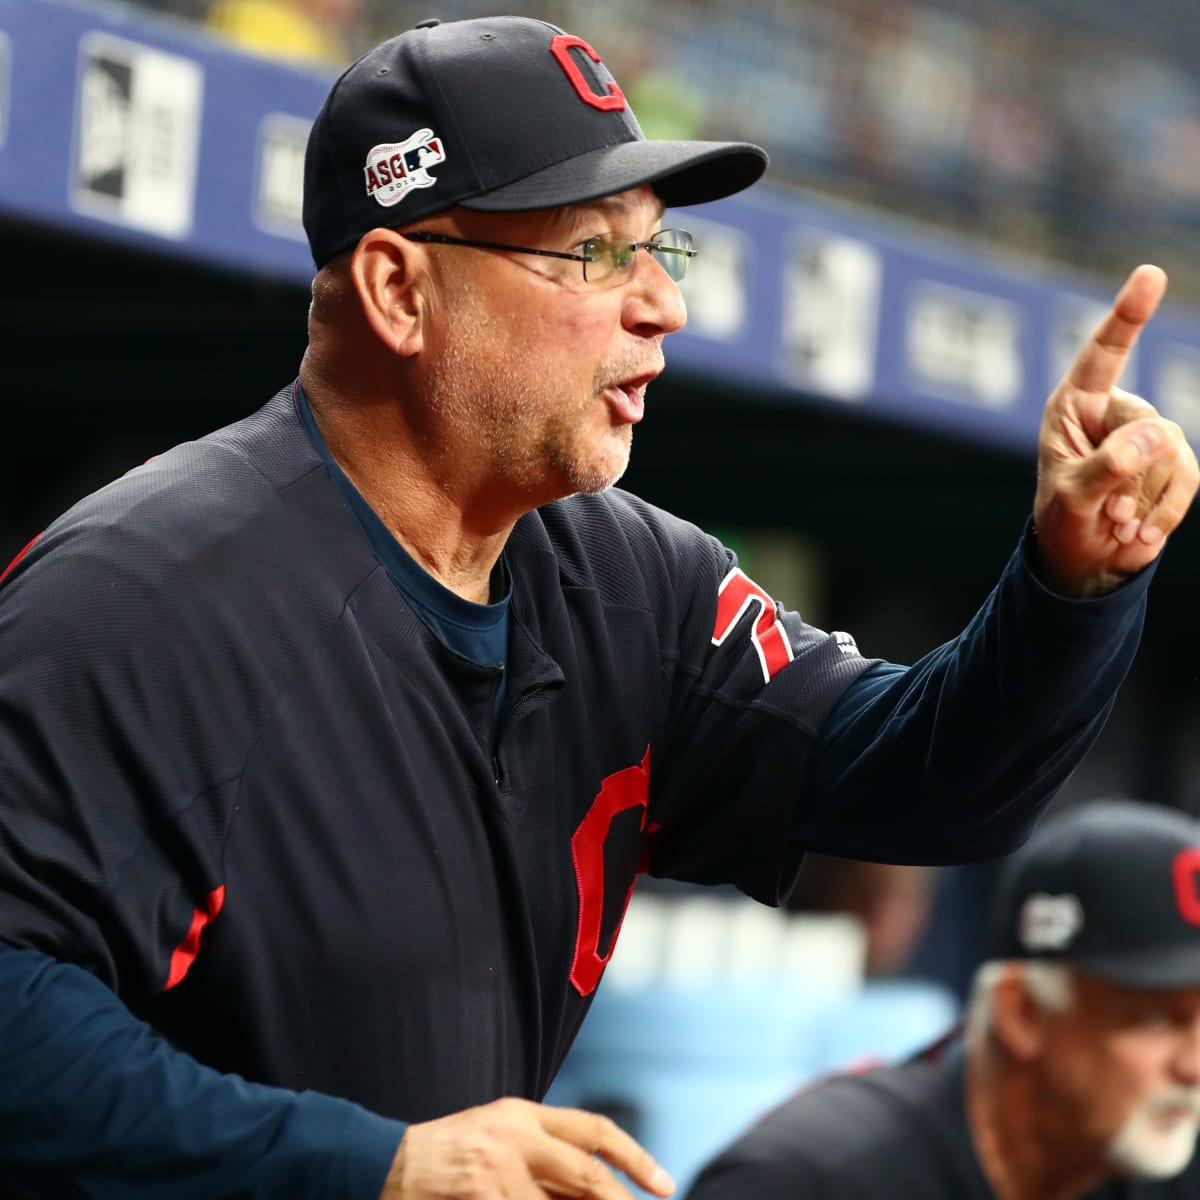 Cleveland Indians to Scrap Team Name